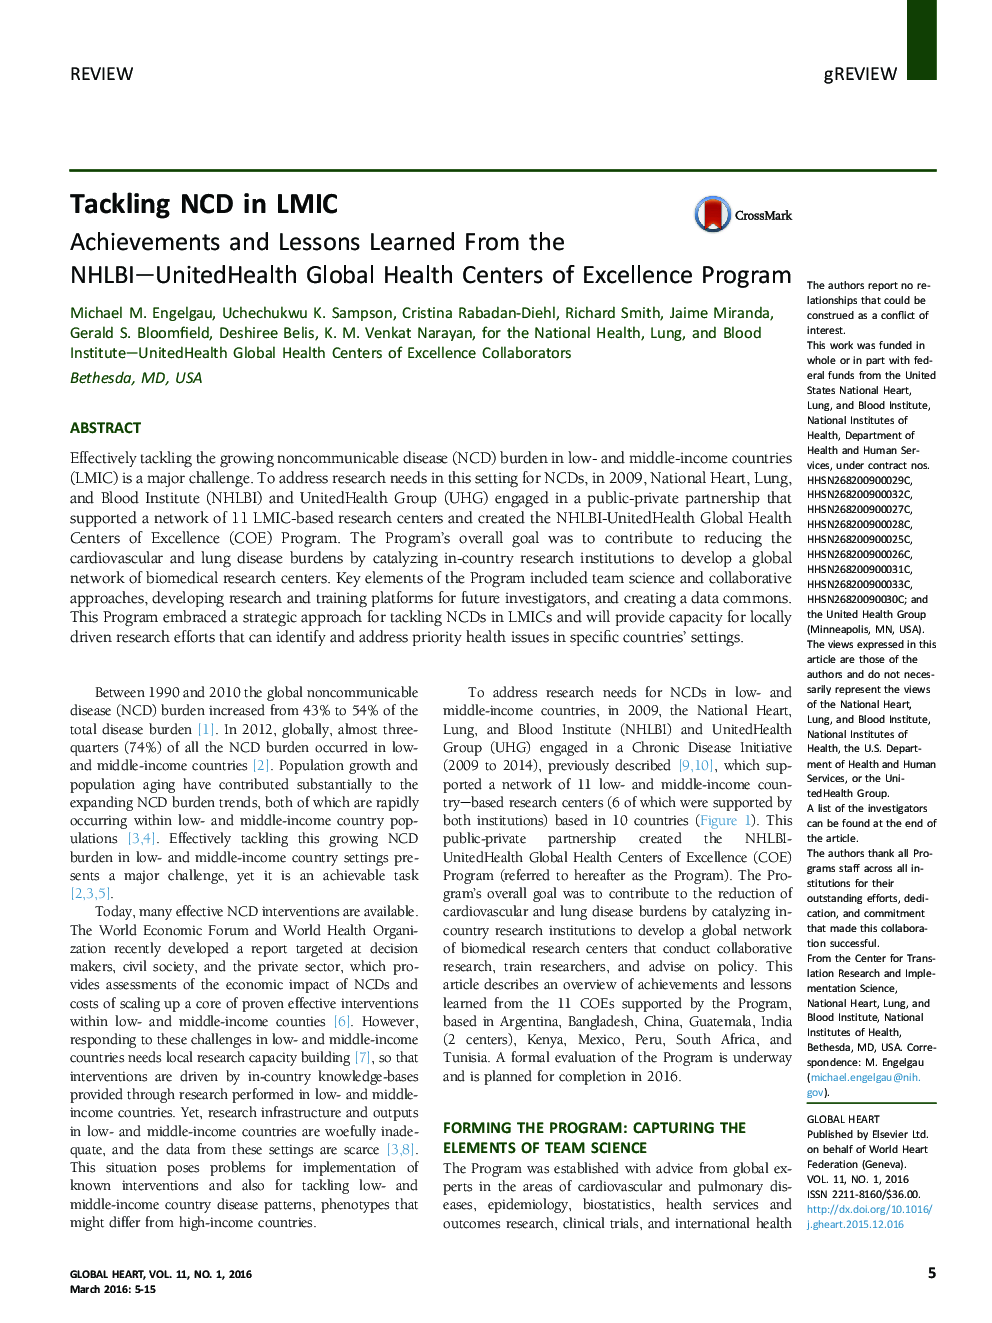 Tackling NCD in LMIC: Achievements and Lessons Learned From the NHLBI-UnitedHealth Global Health Centers of Excellence Program